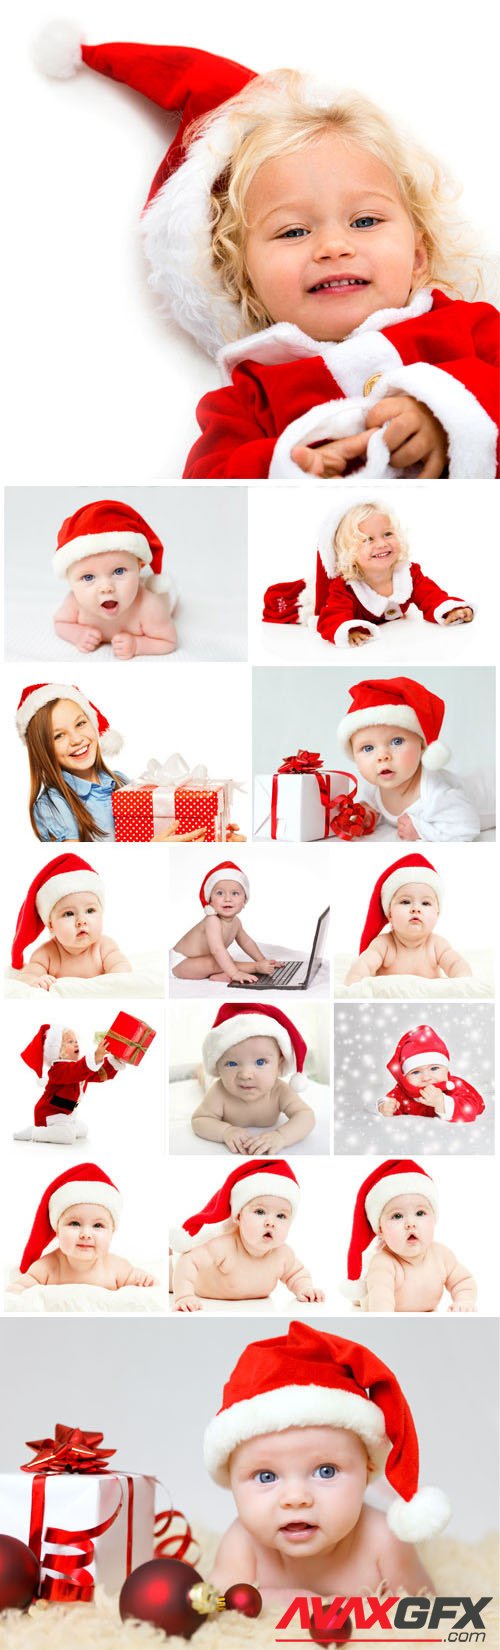 New Year and Christmas stock photos №43